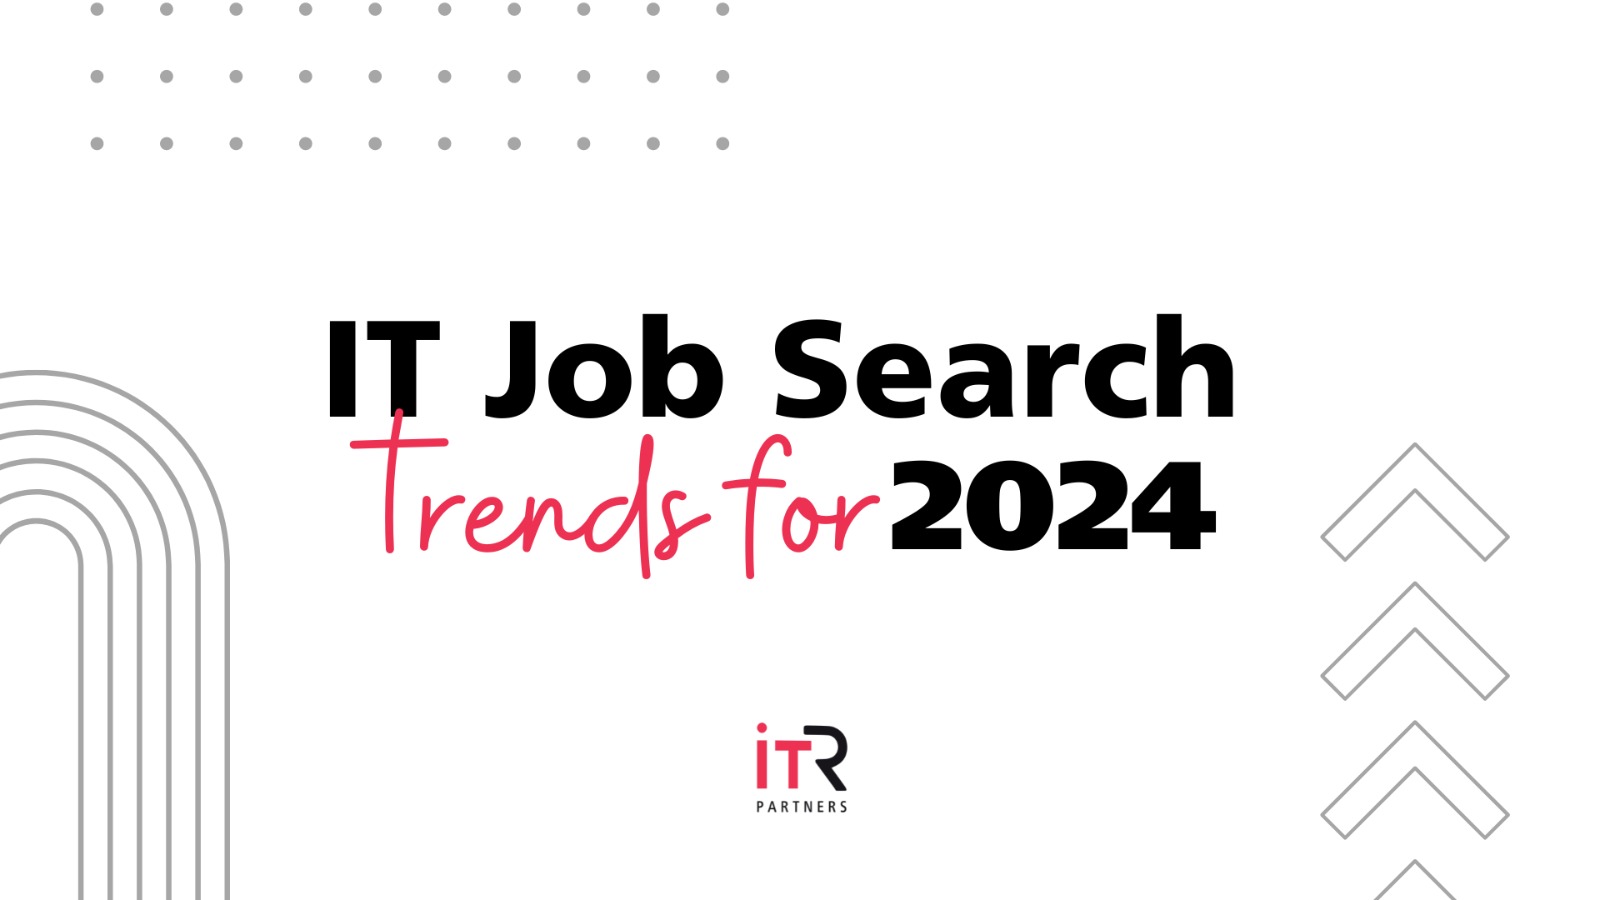 IT job search trends for 2024 ITR Partners